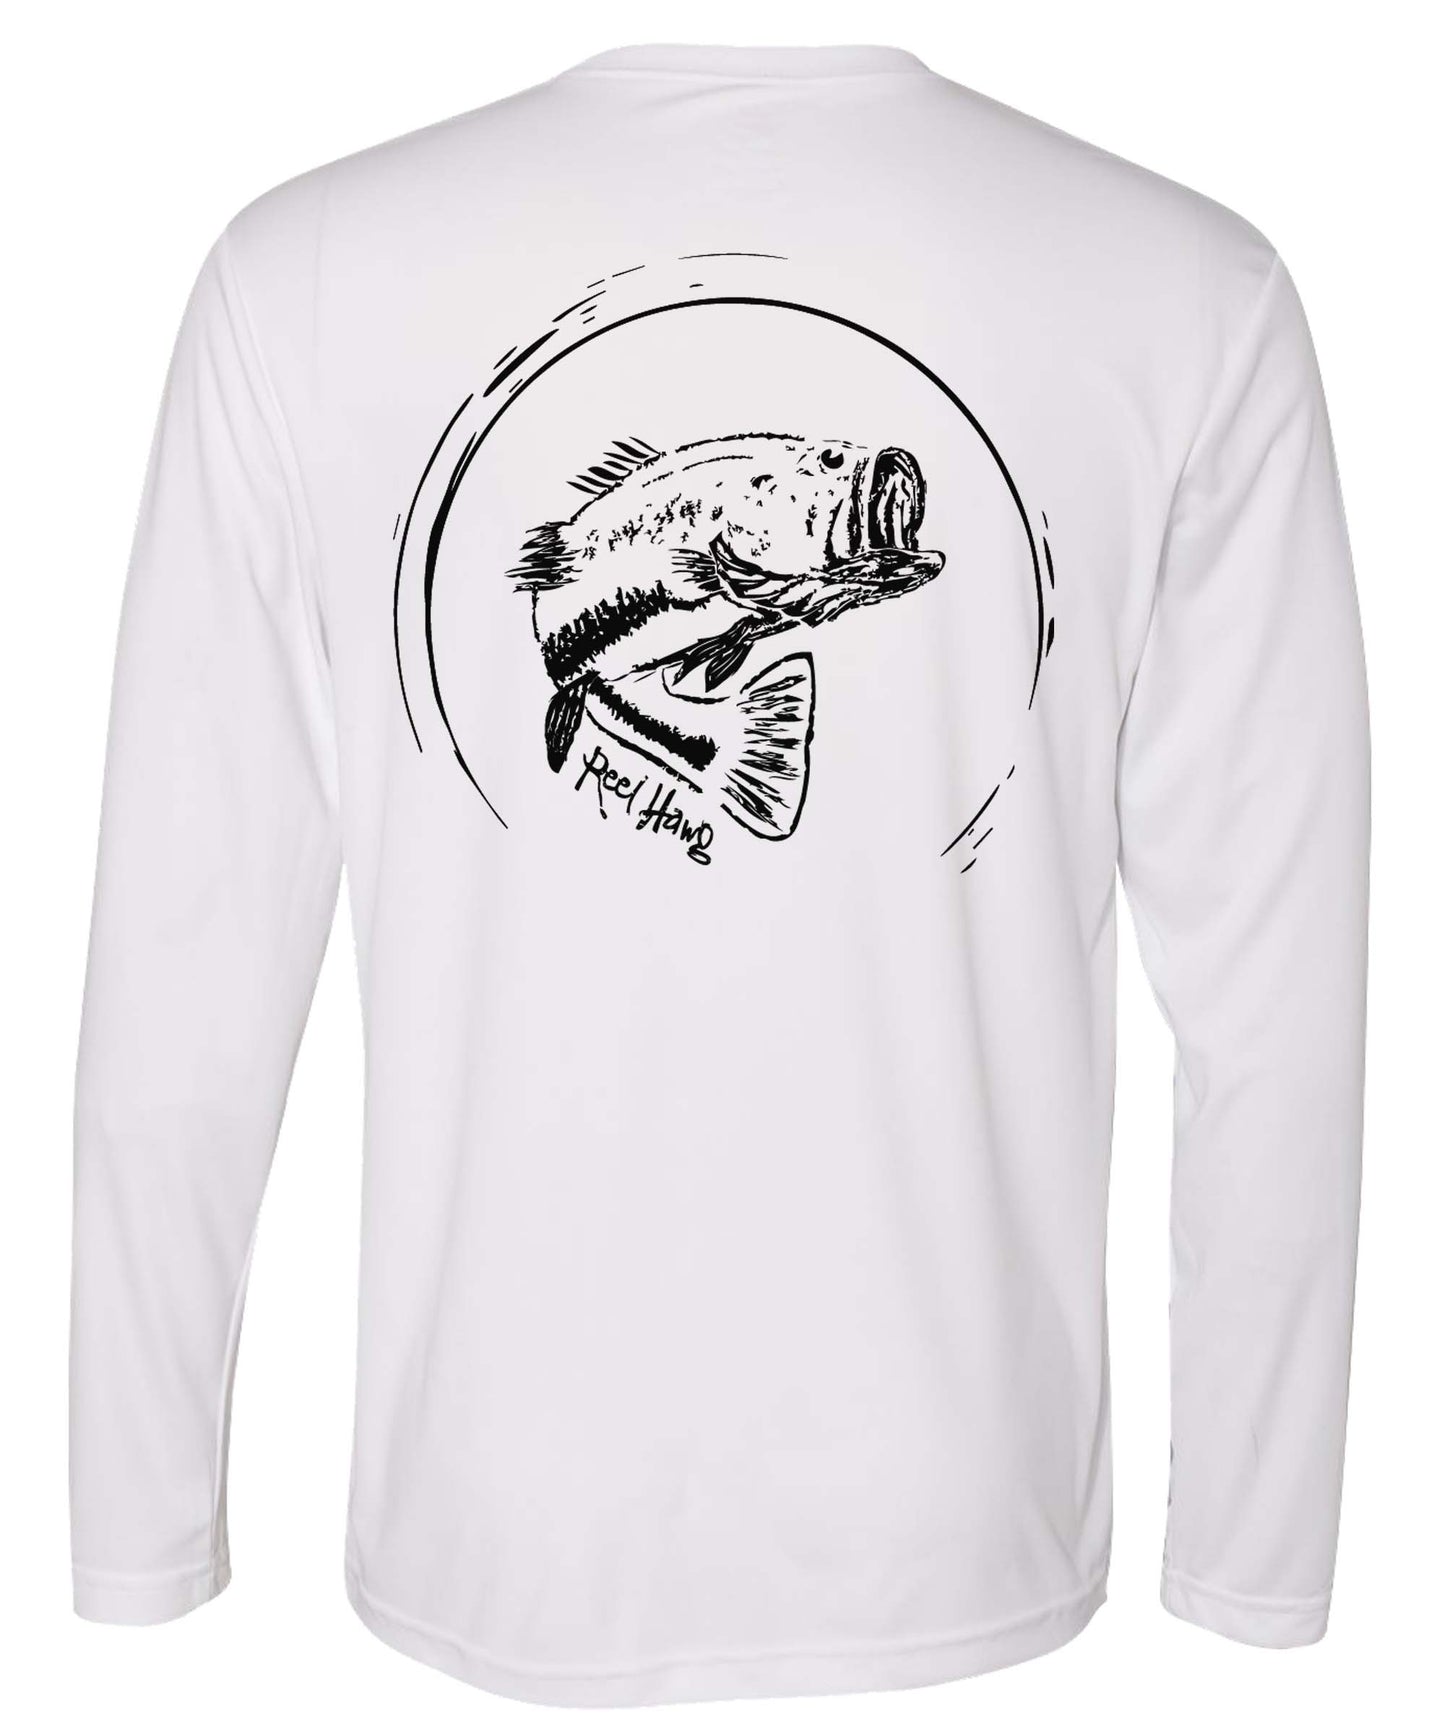 Bass fishing "Reel Hawg" white performance long sleeve shirt with 50+ UV sun protection by Reel Fishy